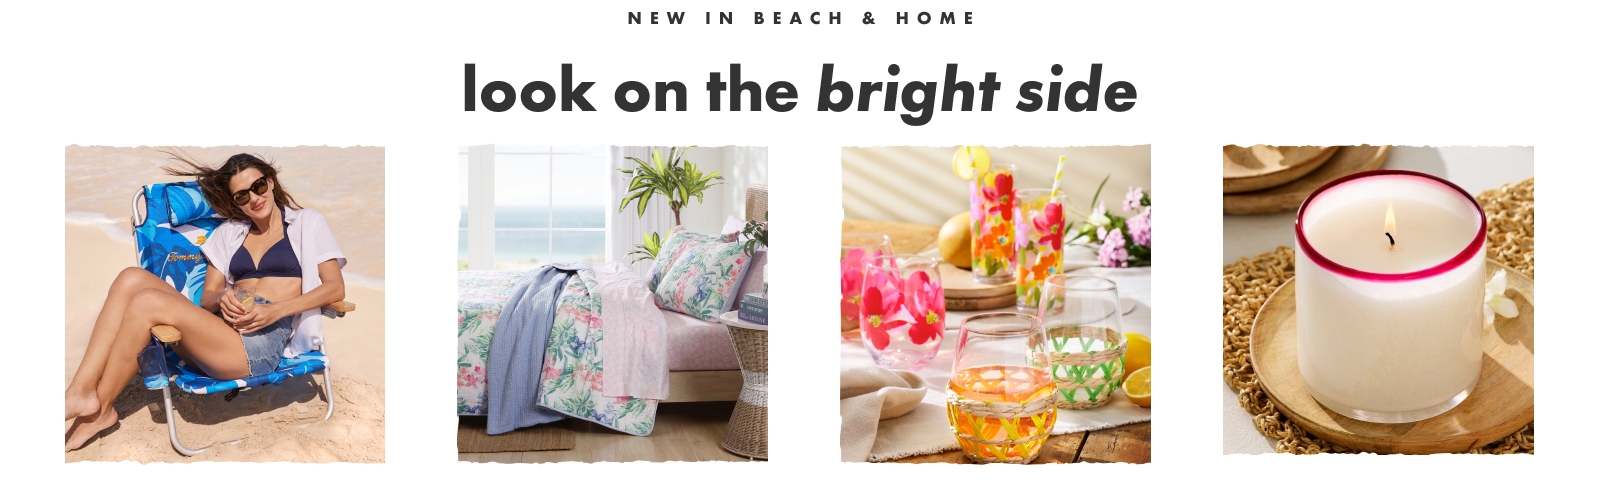 New in Beach & Home